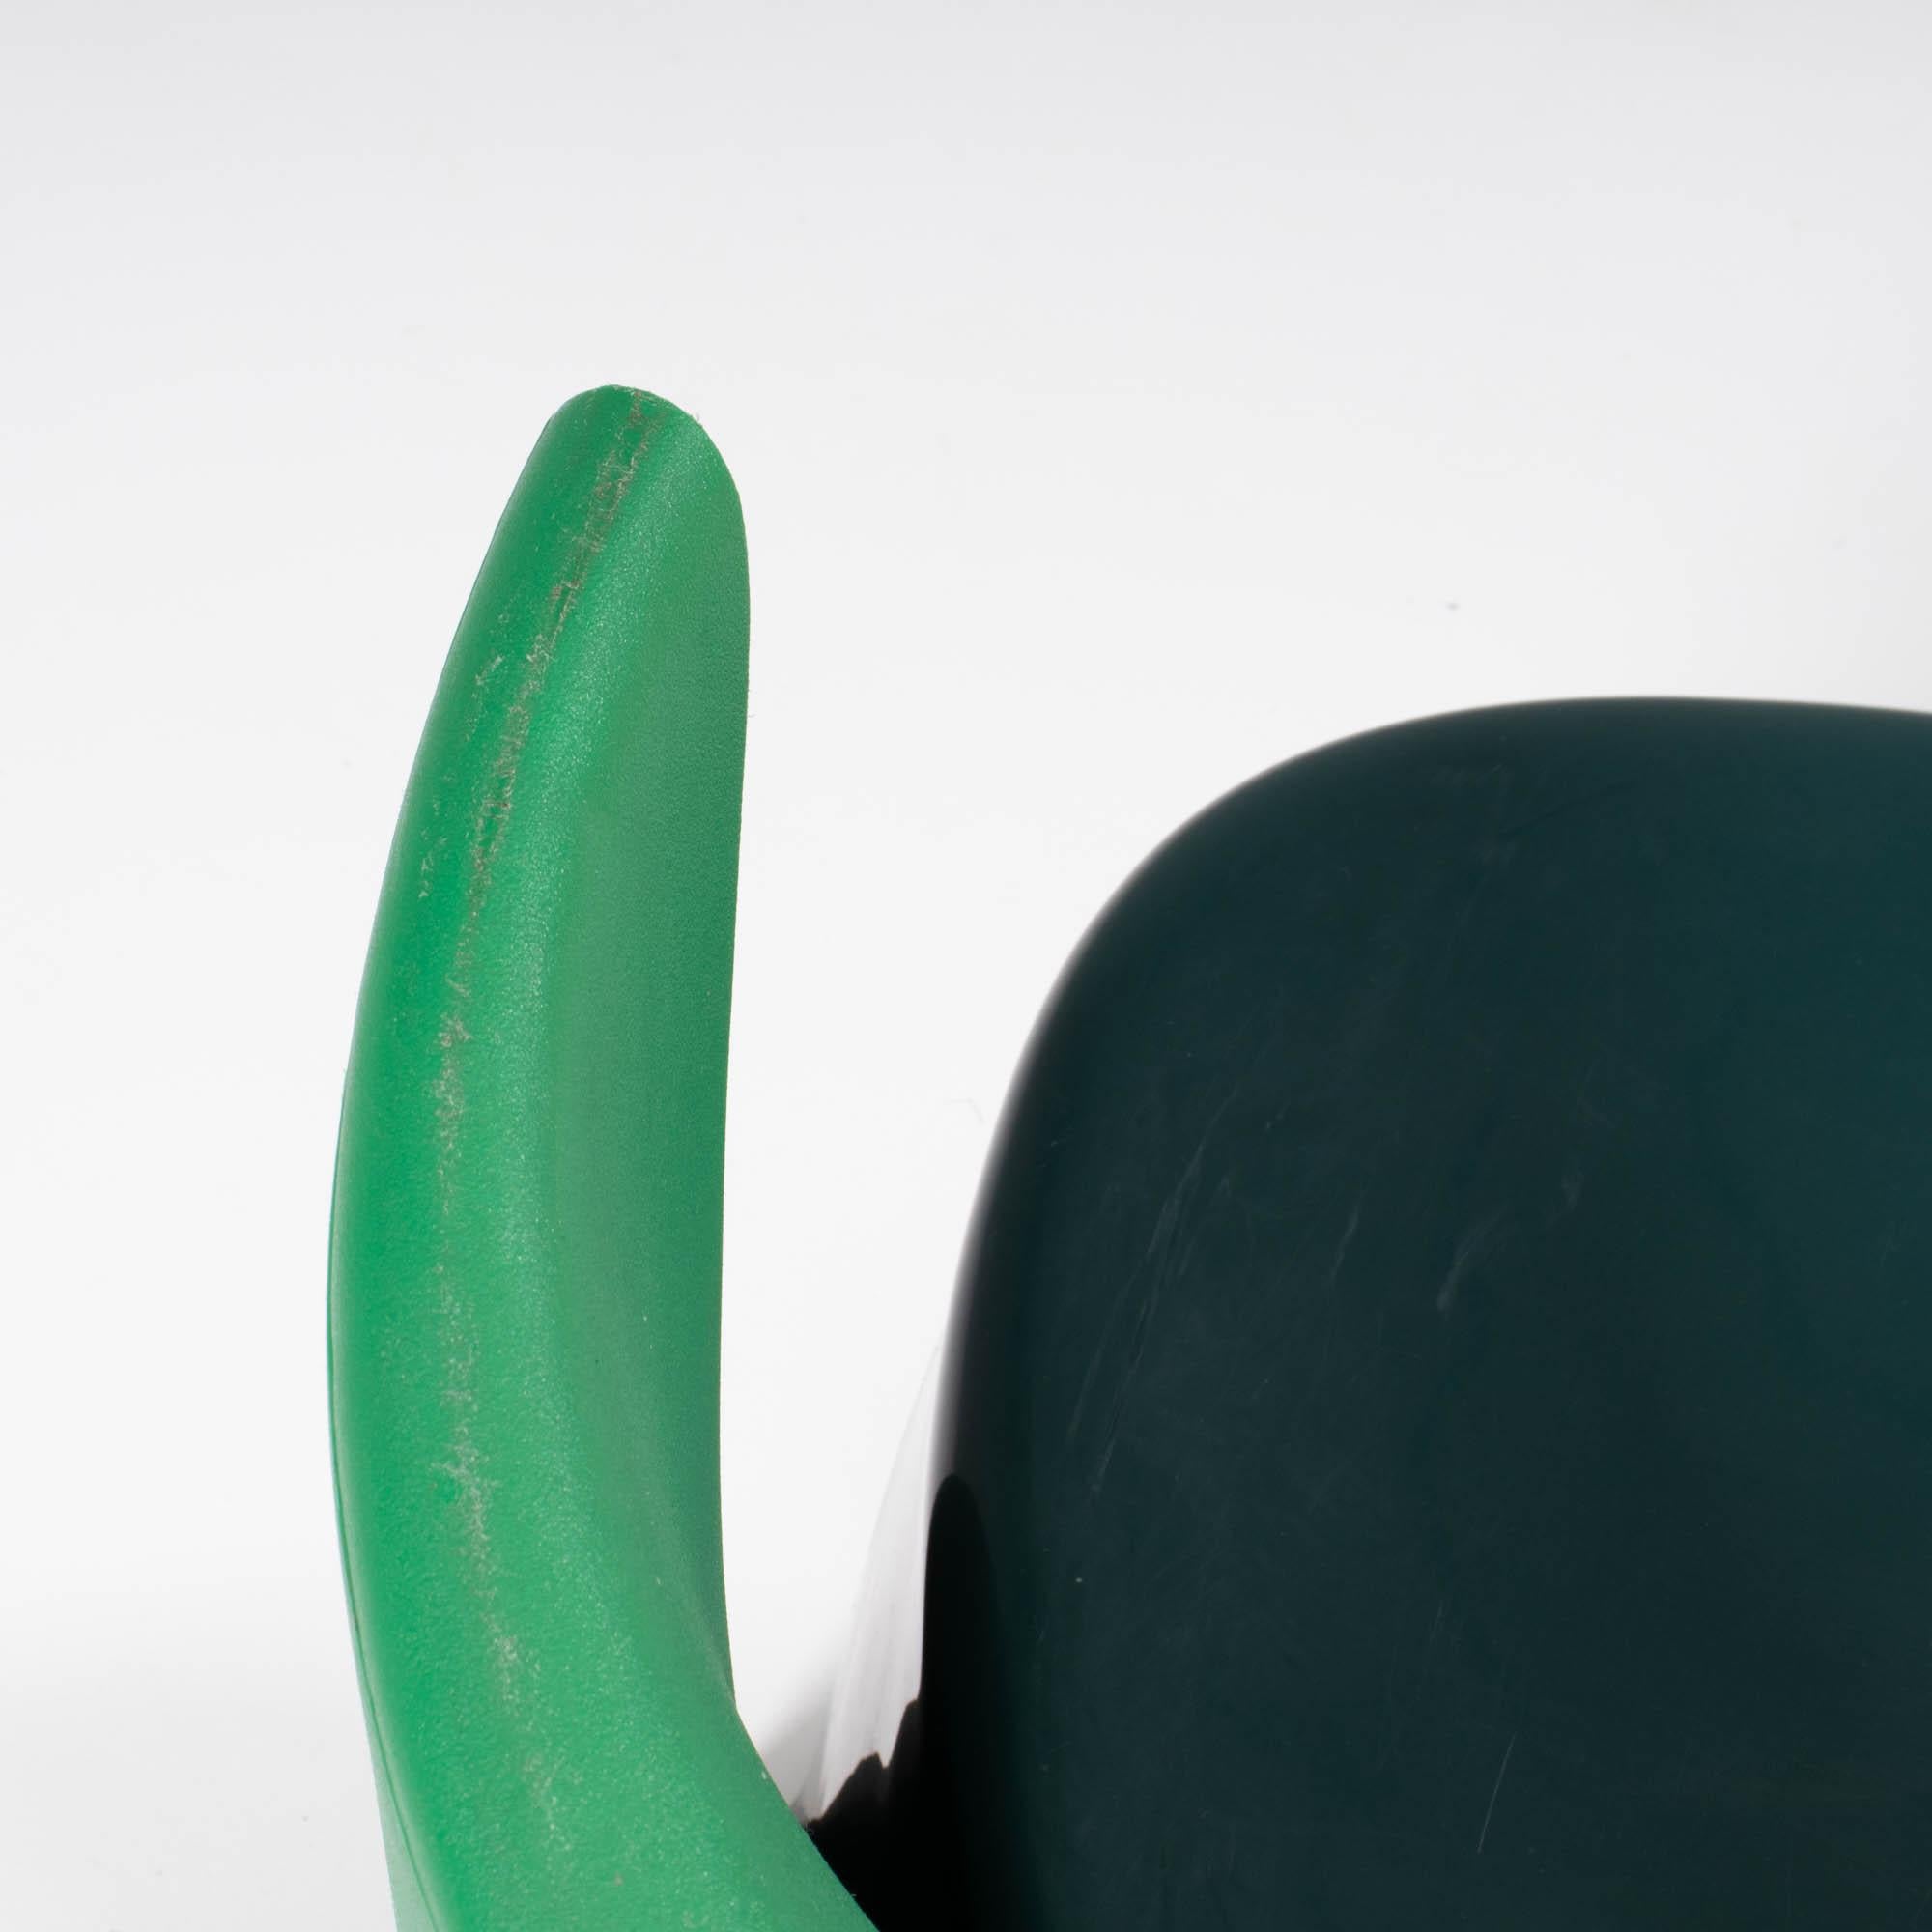 Cappellini by Ron Arad ‘Nino Rota’ Blue & Green Chairs, Set of 2 2